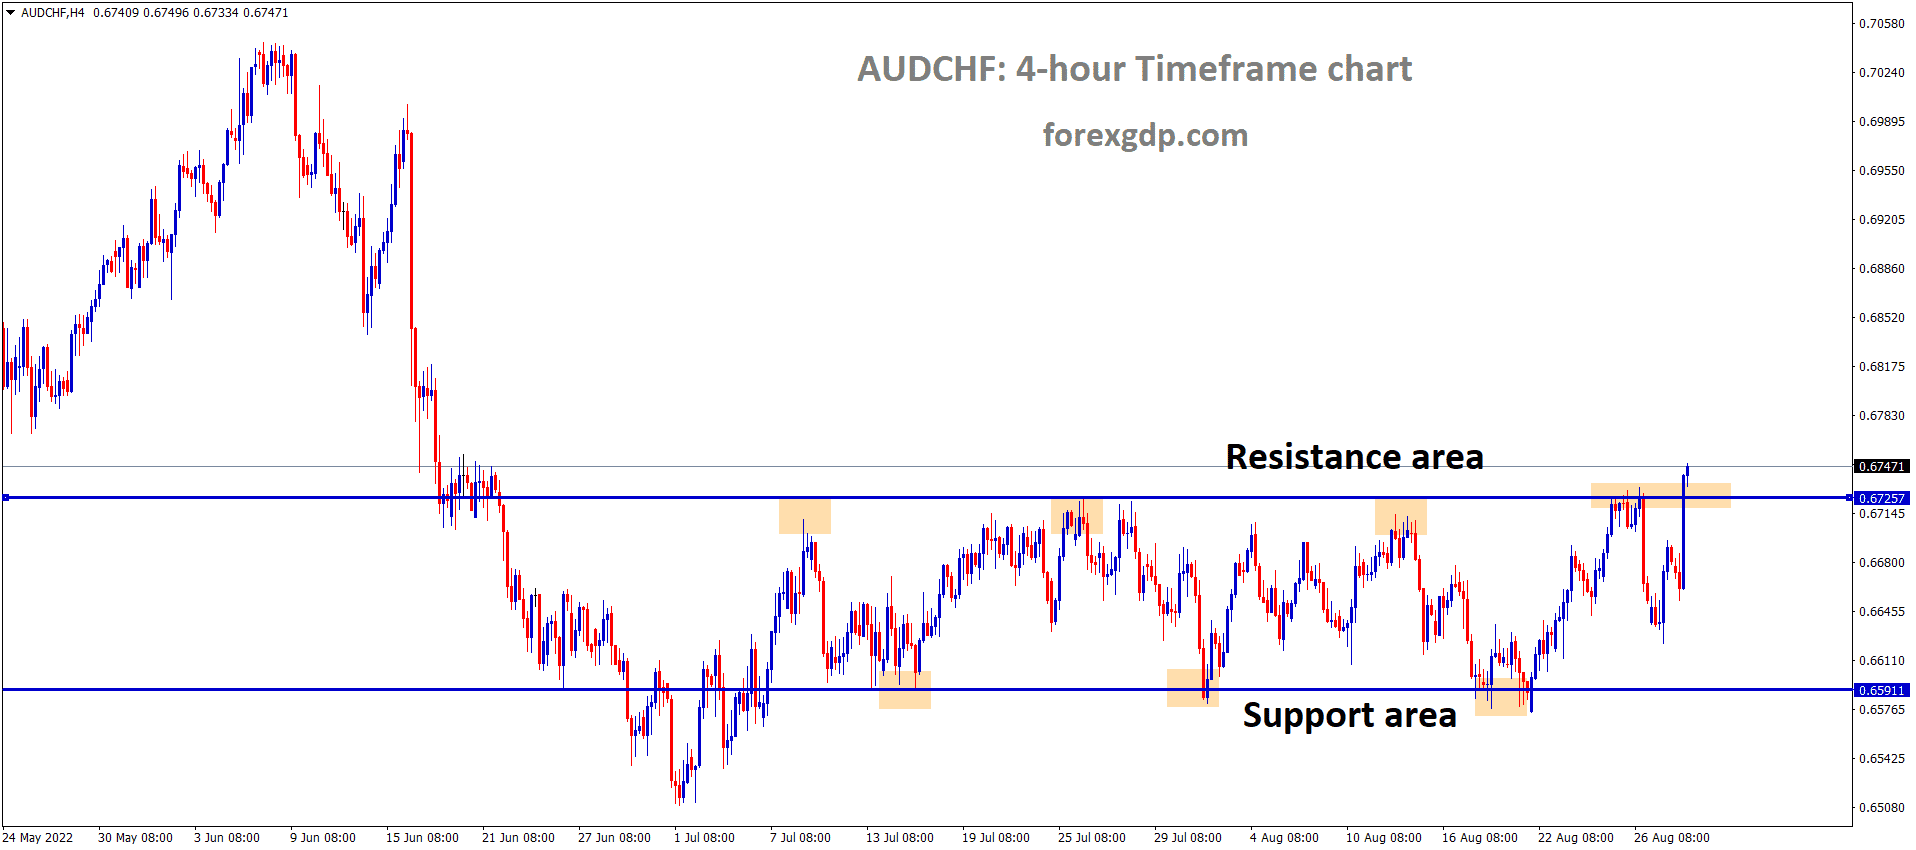 AUDCHF is moving in the Box Pattern and the Market has reached the horizontal resistance area of the pattern 1